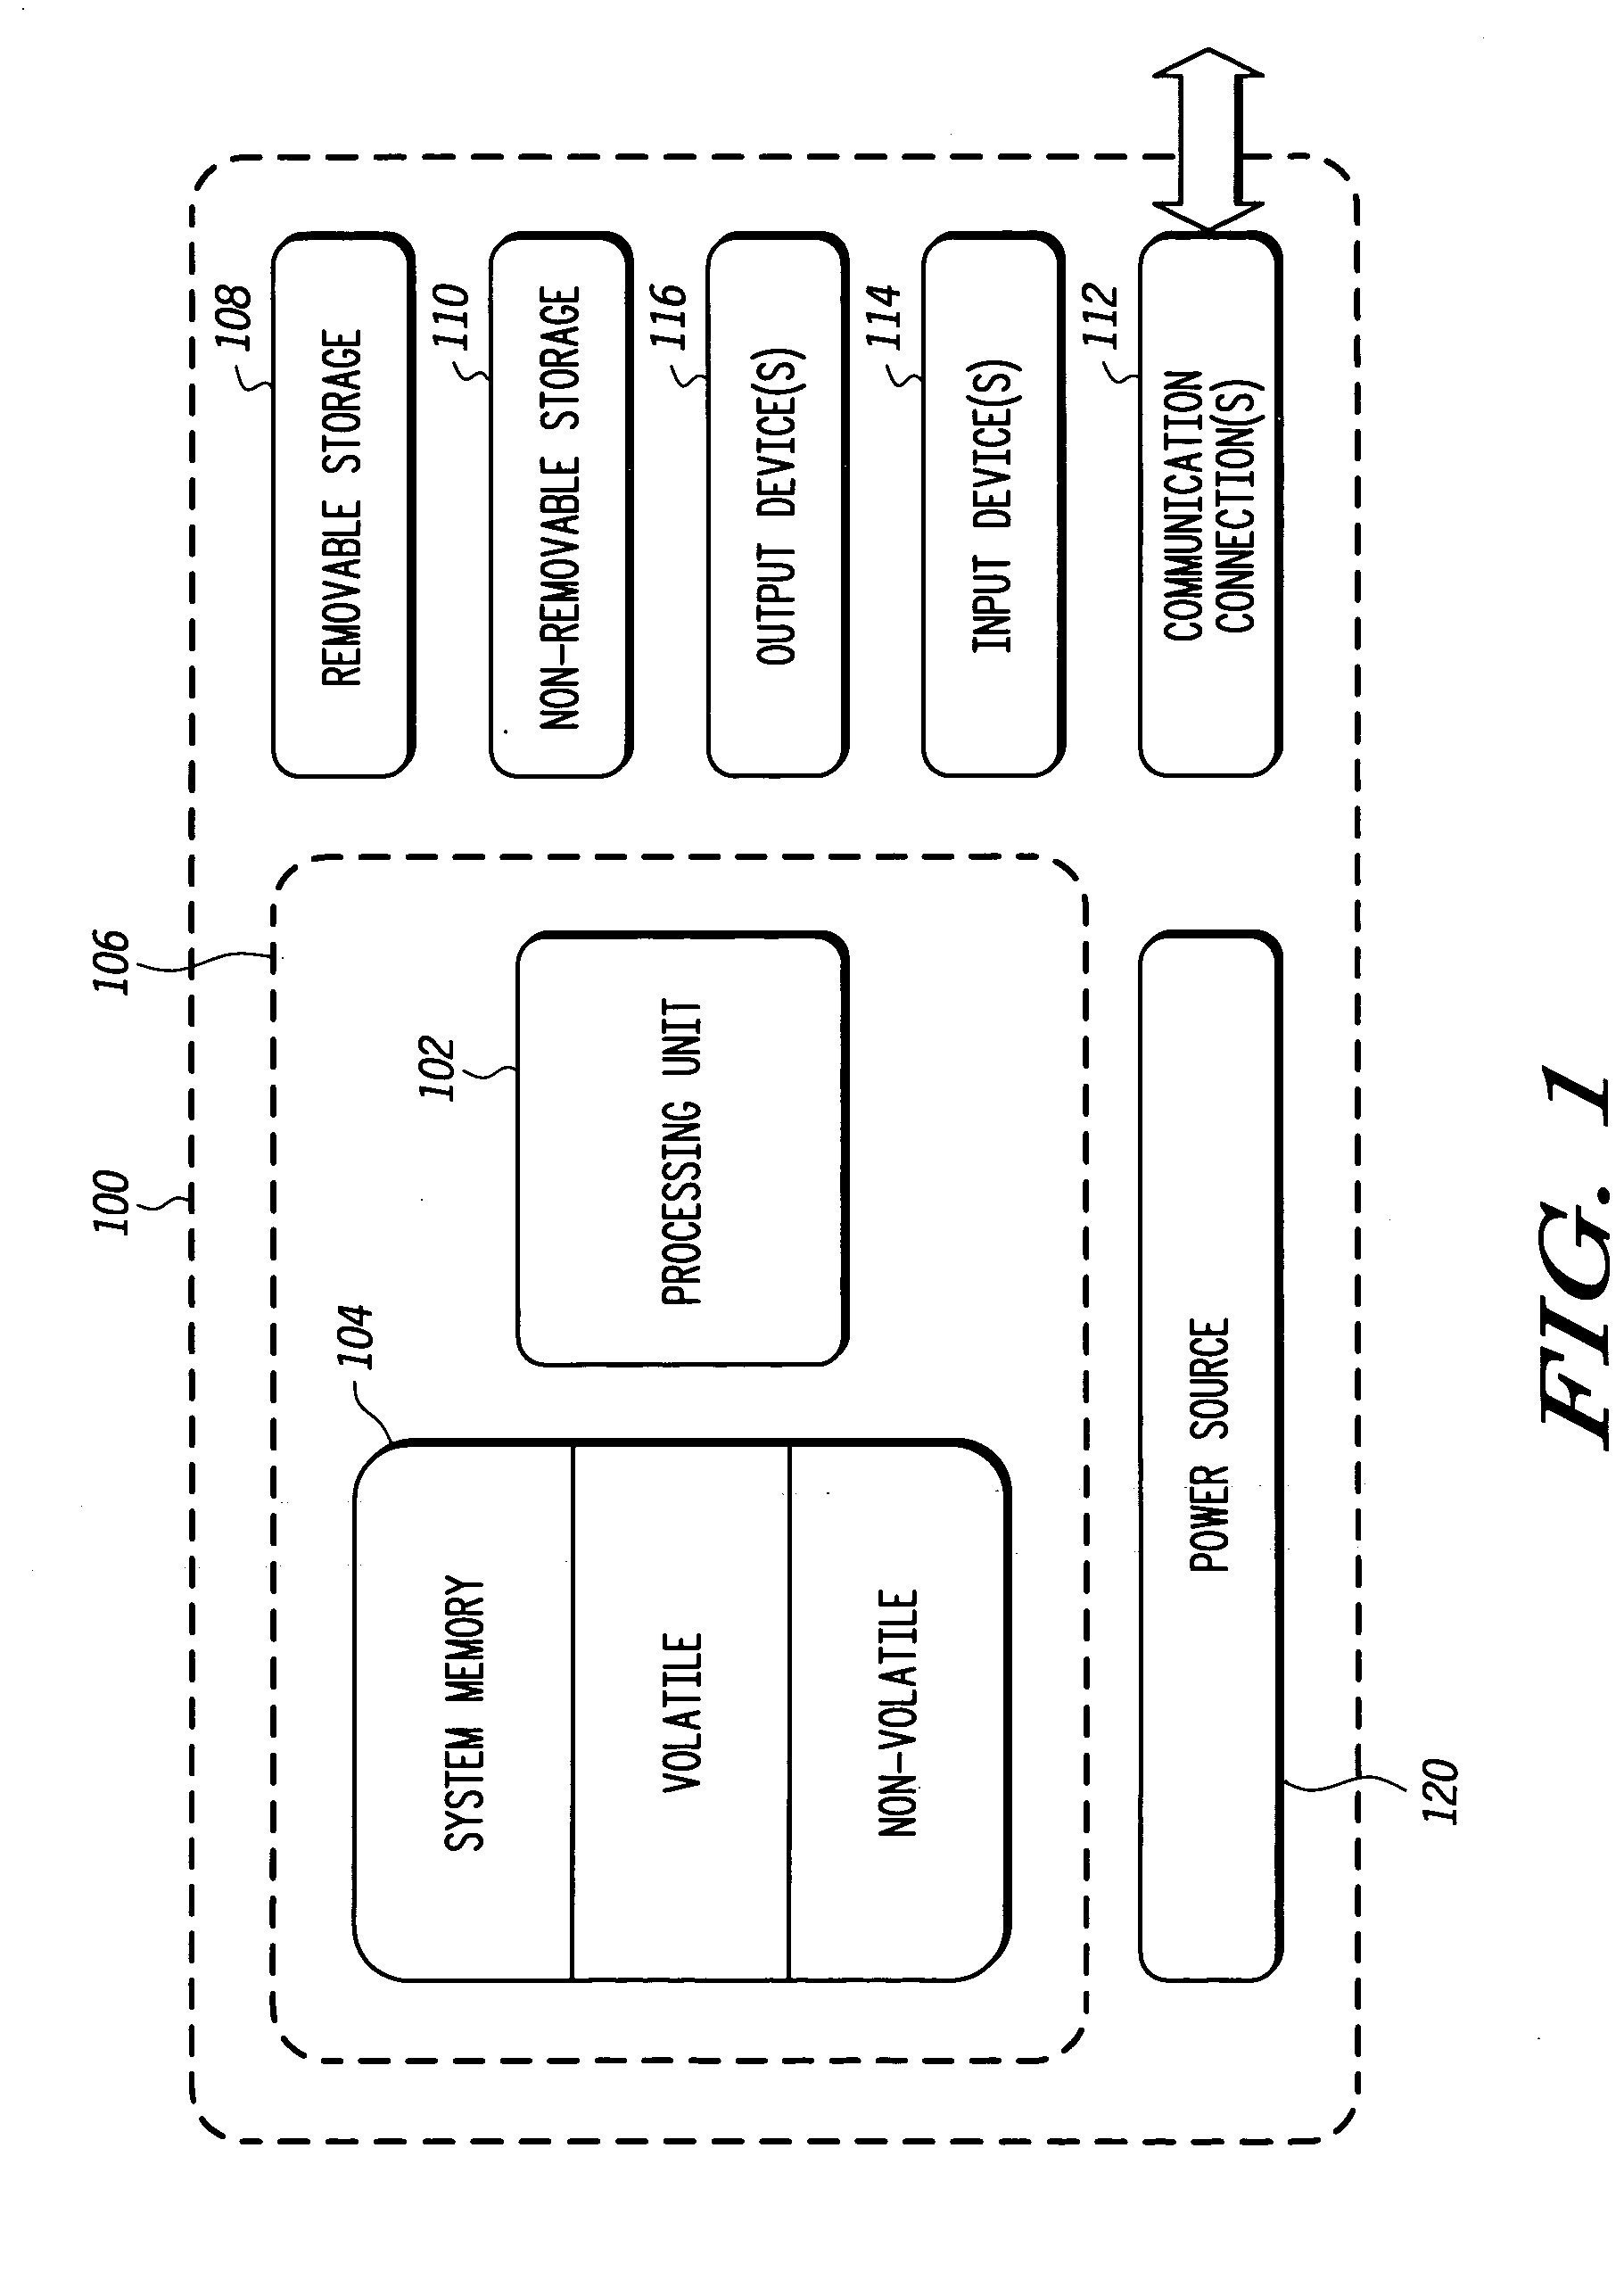 DC interference removal in wireless communications